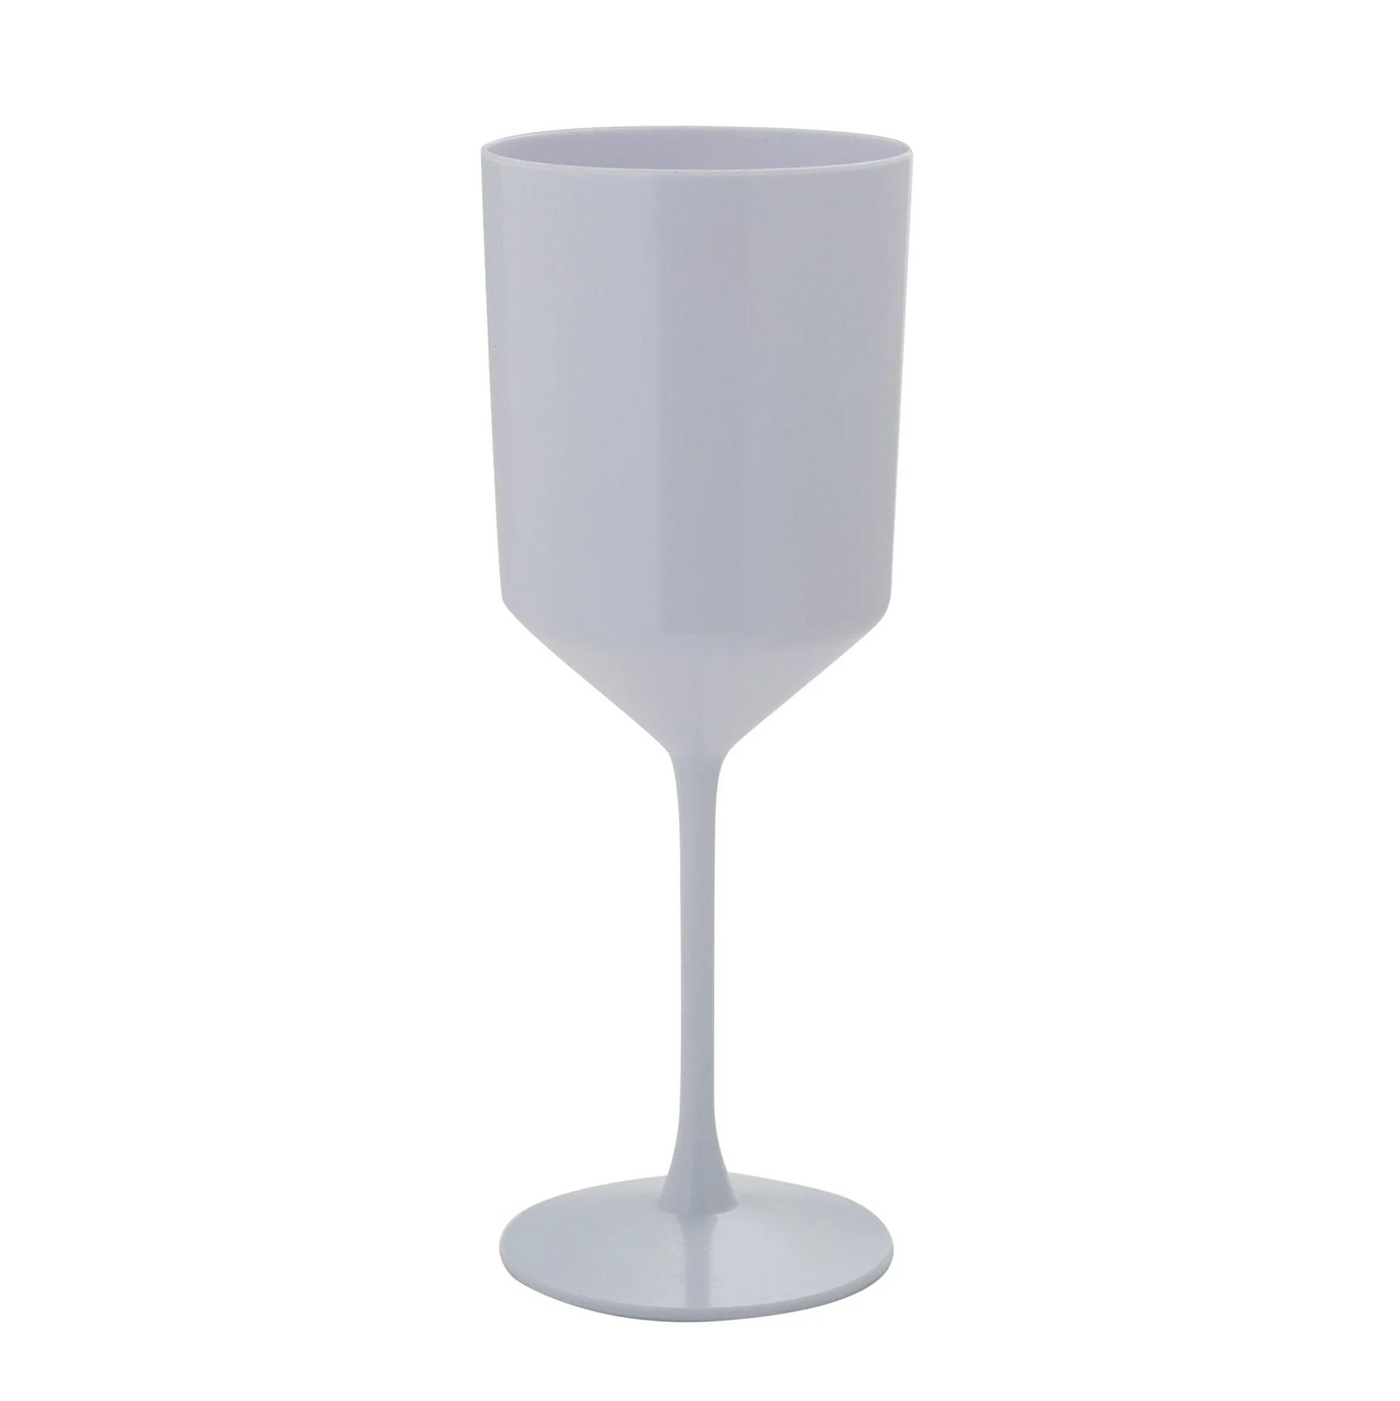 12 oz. Round White Plastic Wine Cups (4 Count) - Set With Style